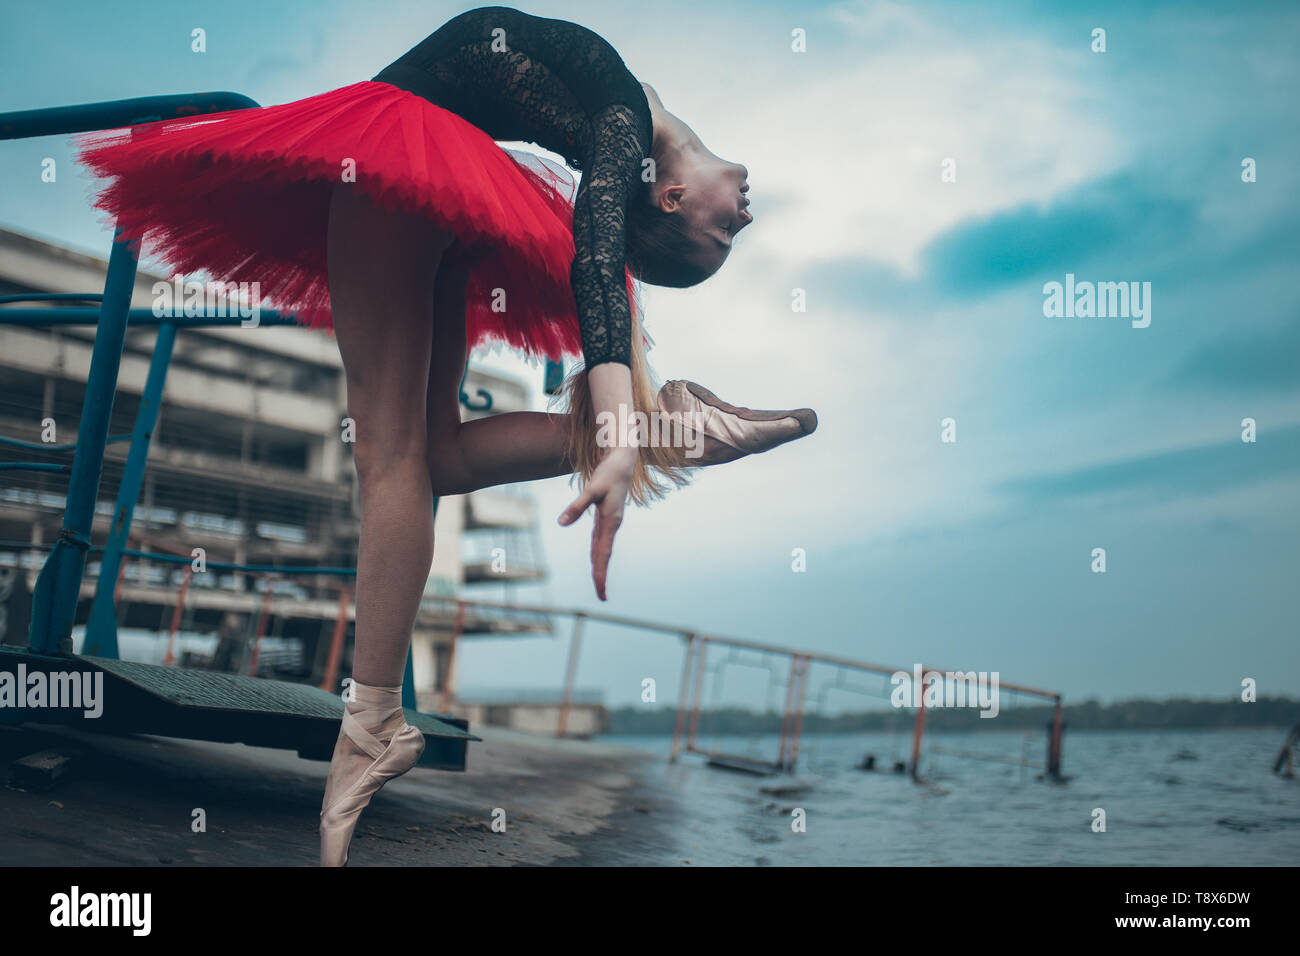 Ballerina is dancing on the coast of river in a black and red tutu against background of building. Stock Photo